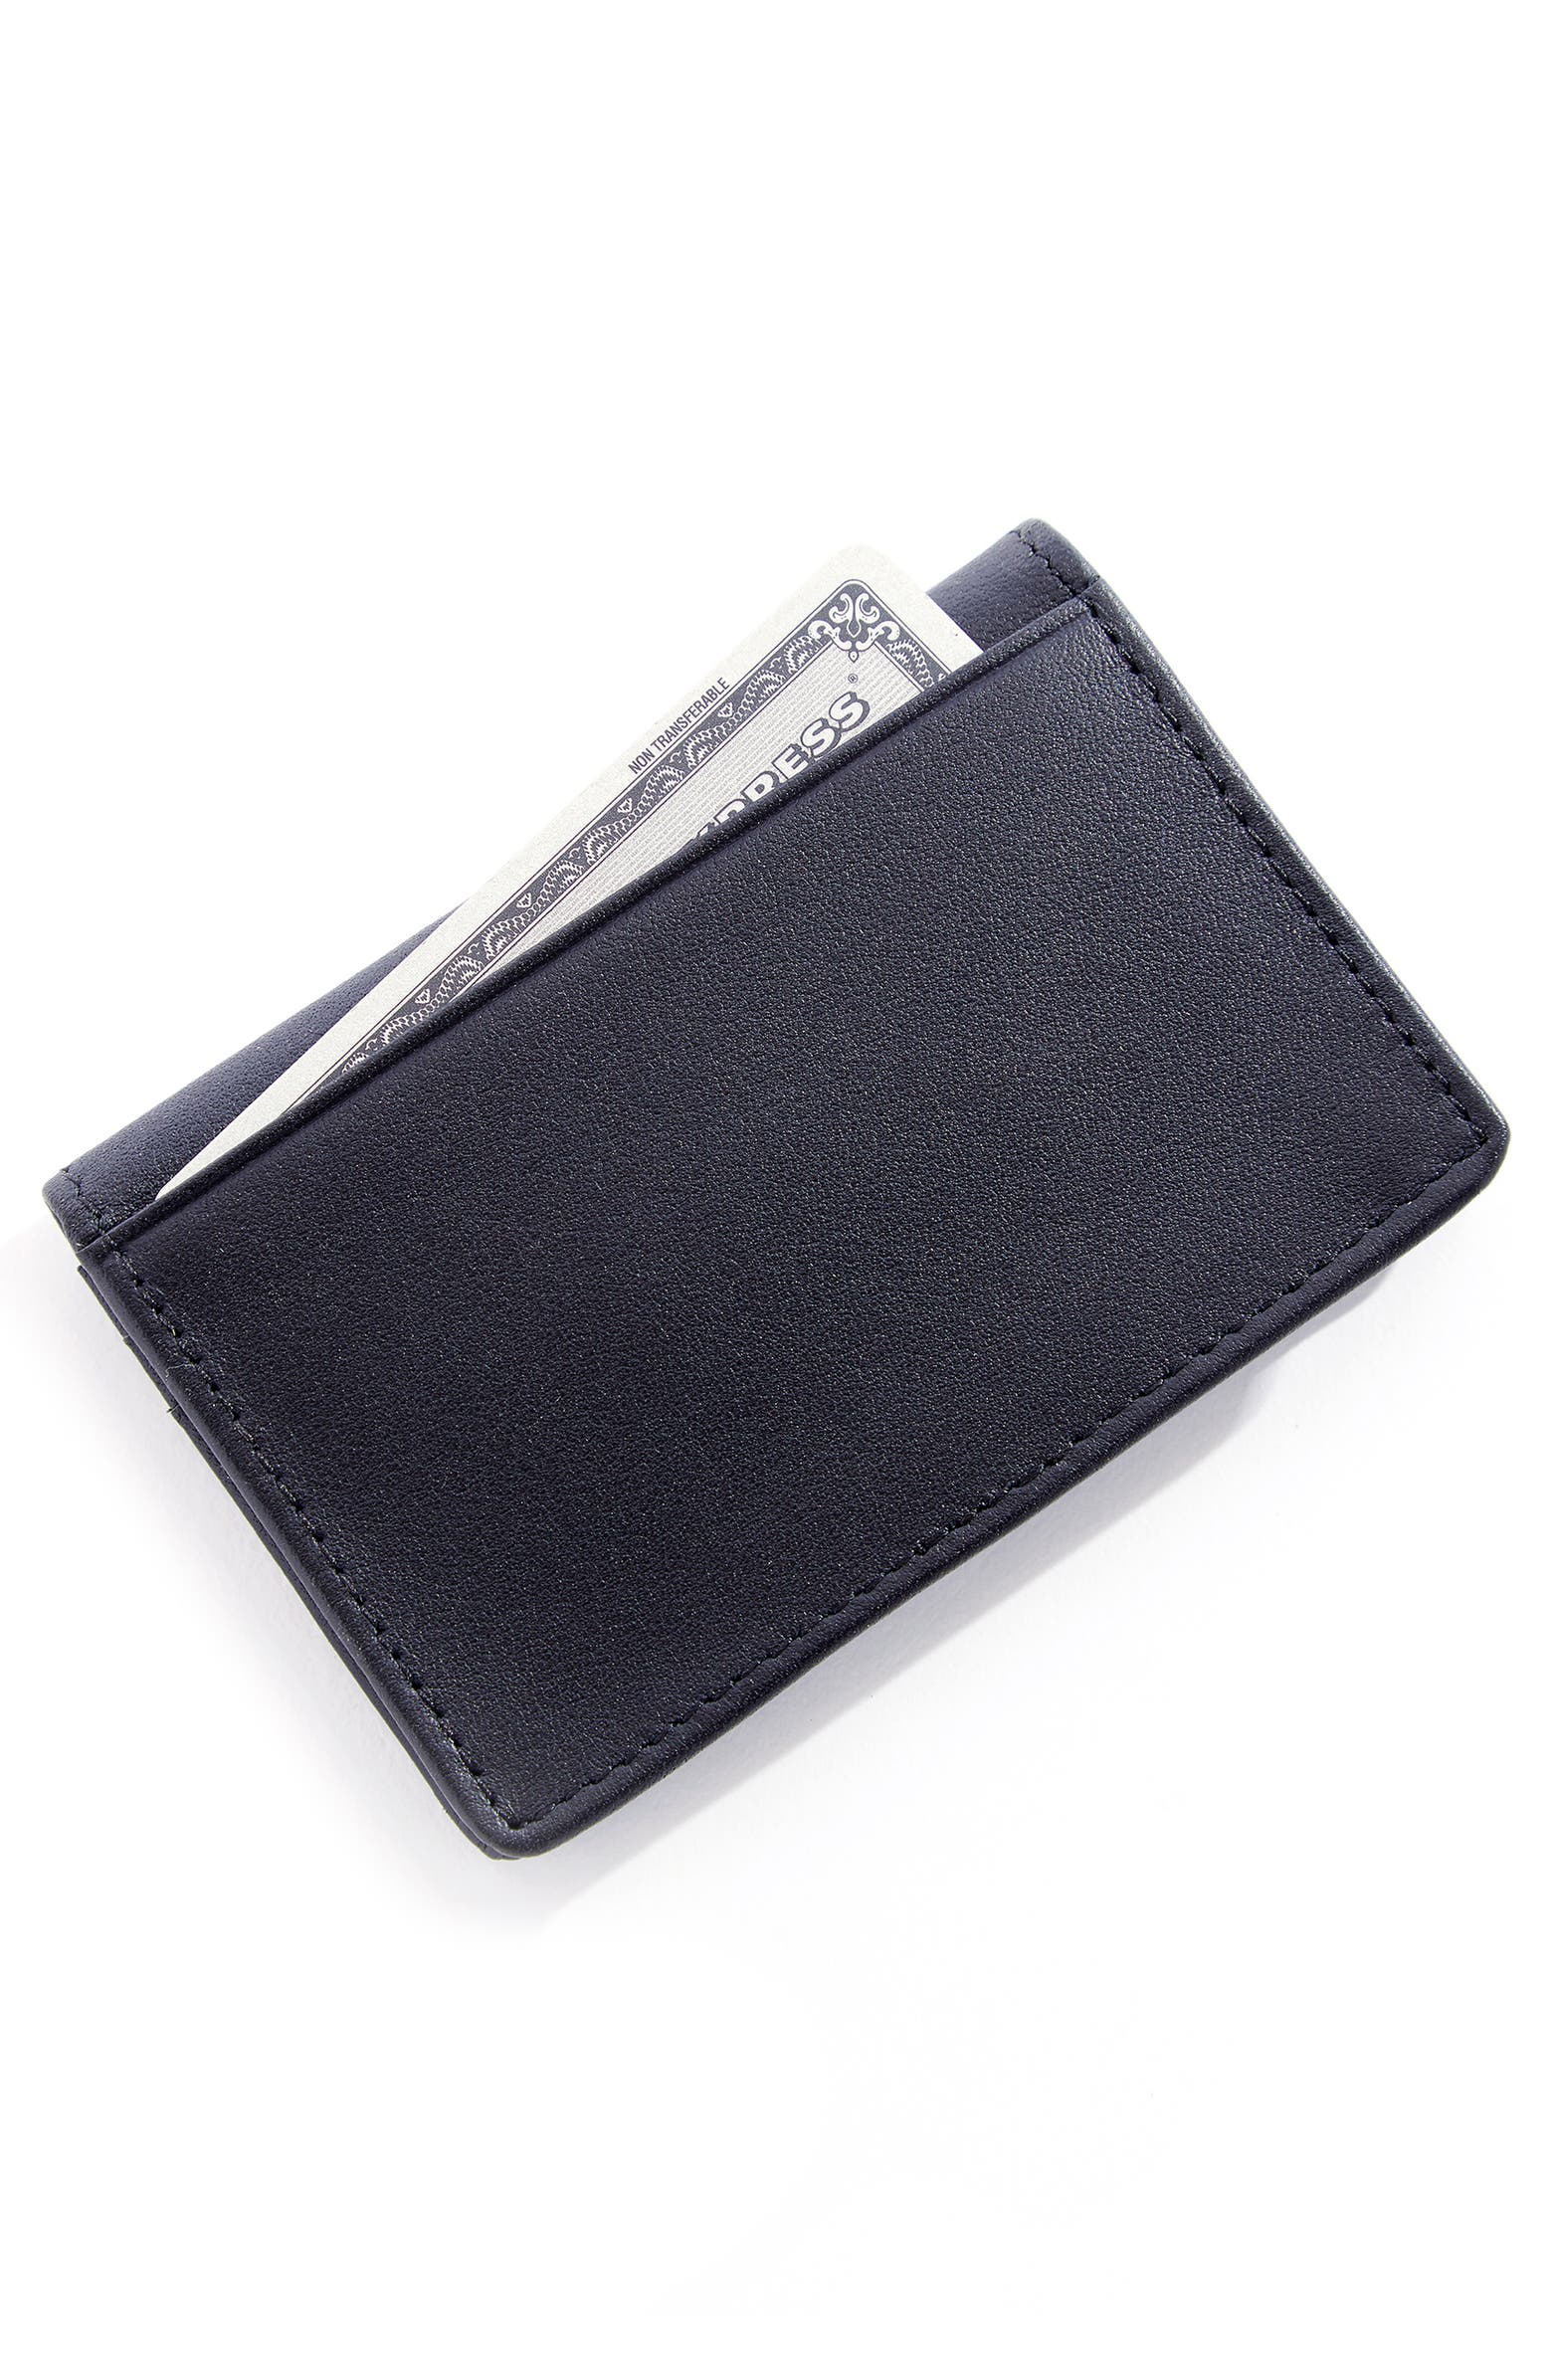 ROYCE New York Leather Card Case | Nordstrom